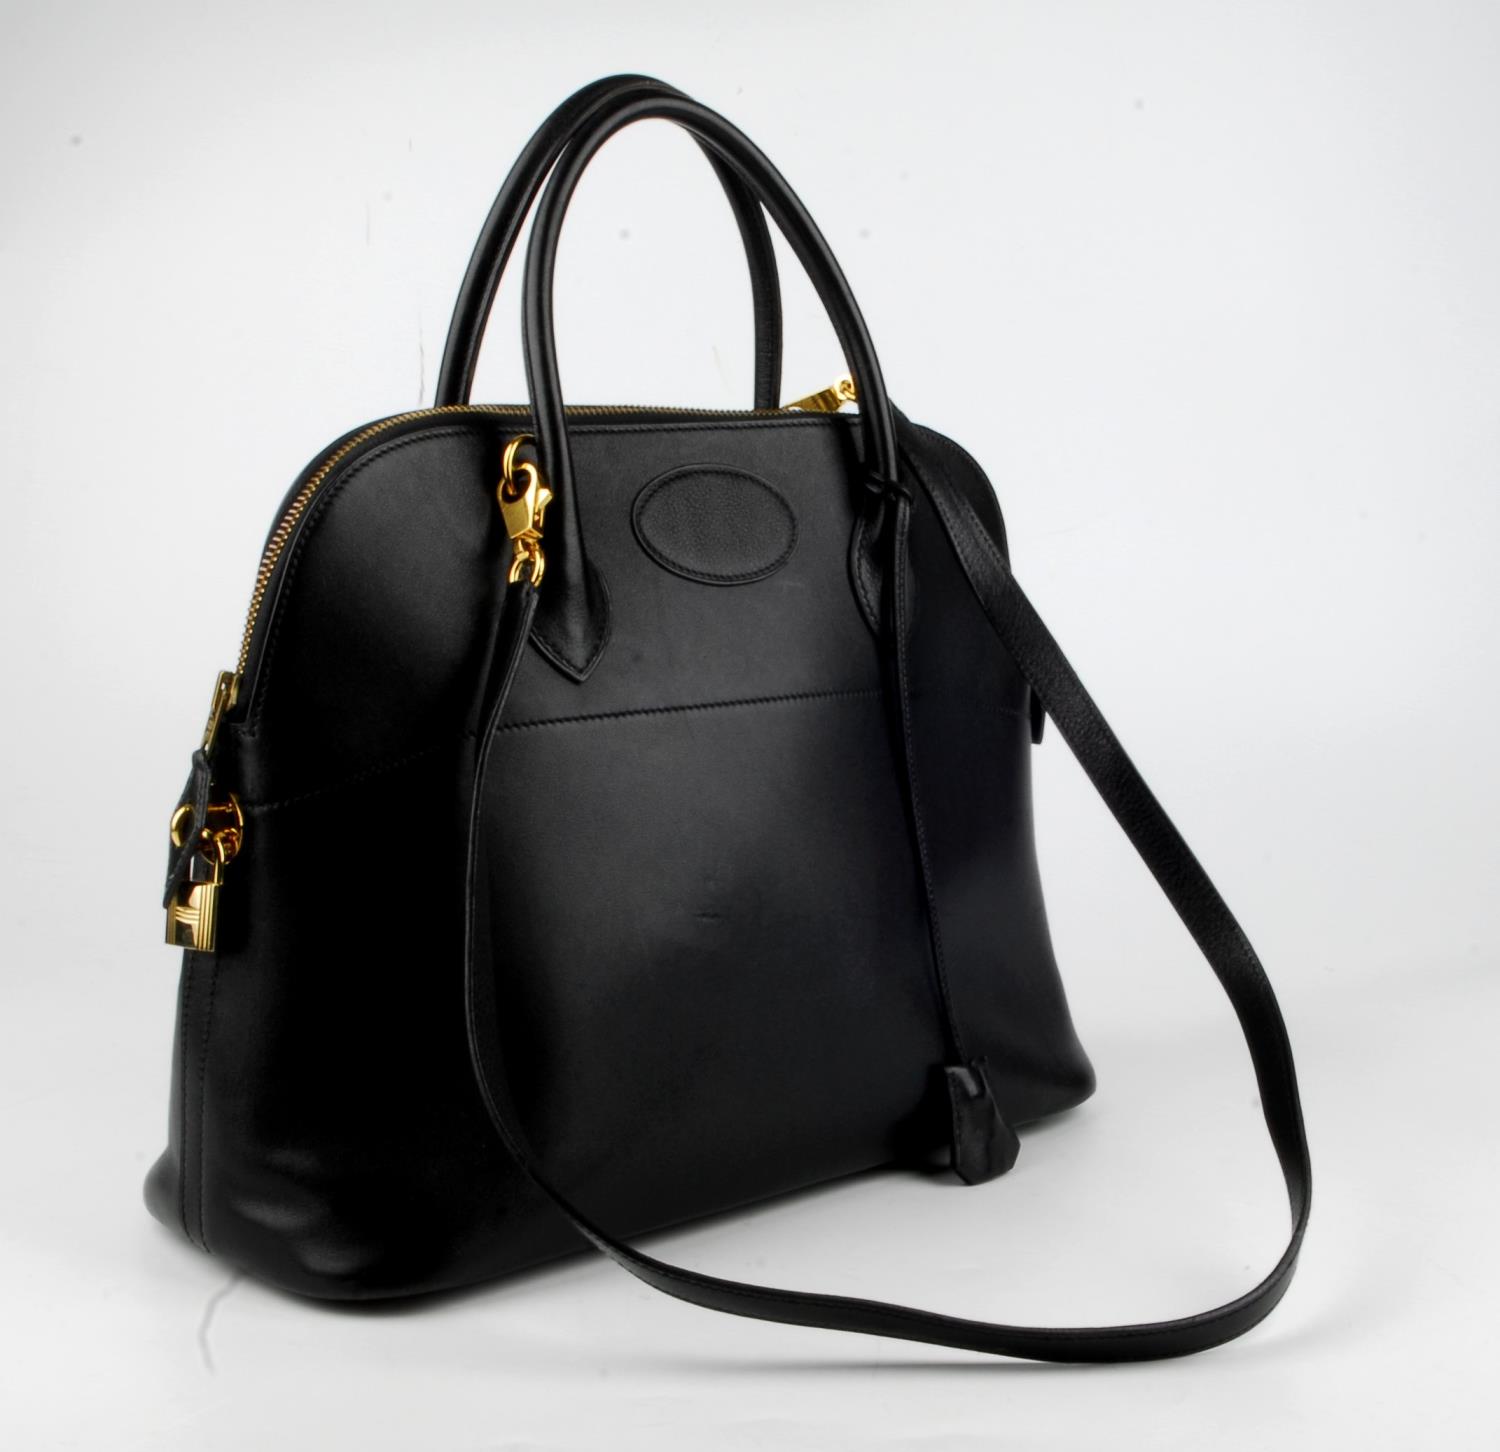 HERMÈS - a 1992 black Bolide handbag. Designed with a smooth black leather exterior and gold-tone - Image 4 of 4